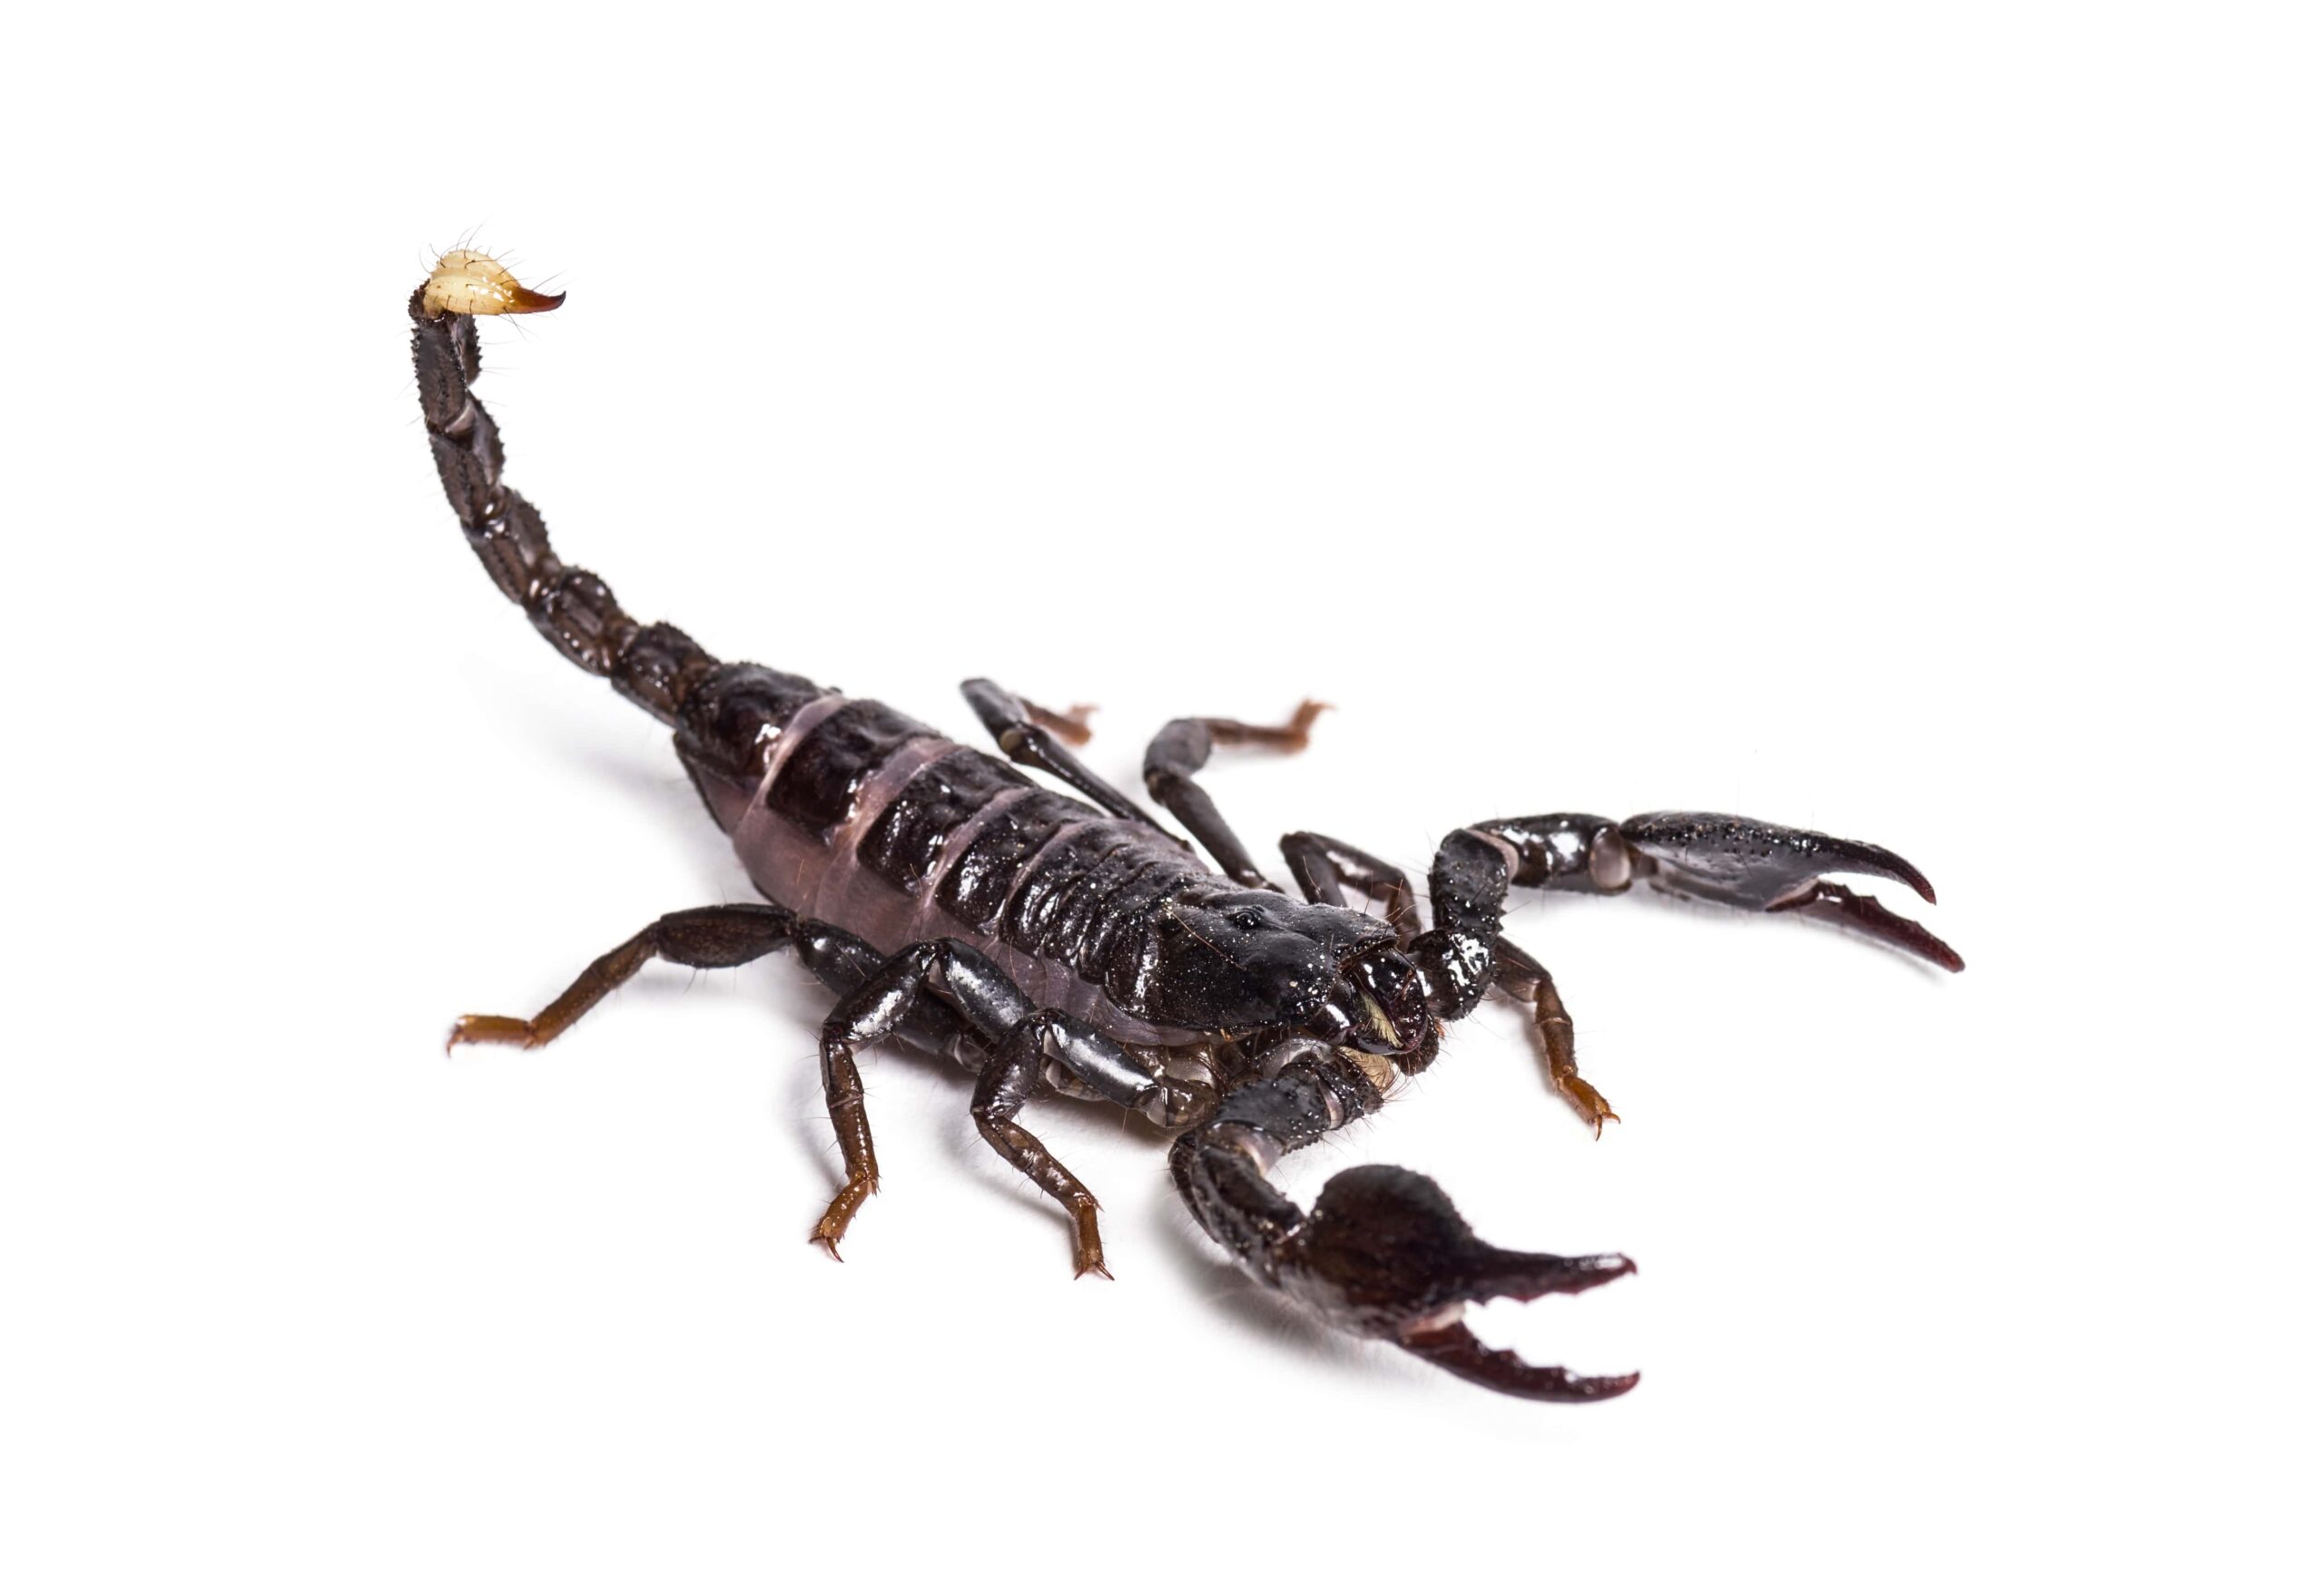 scorpion-pandinus-dictator-in-front-of-white-bac-min